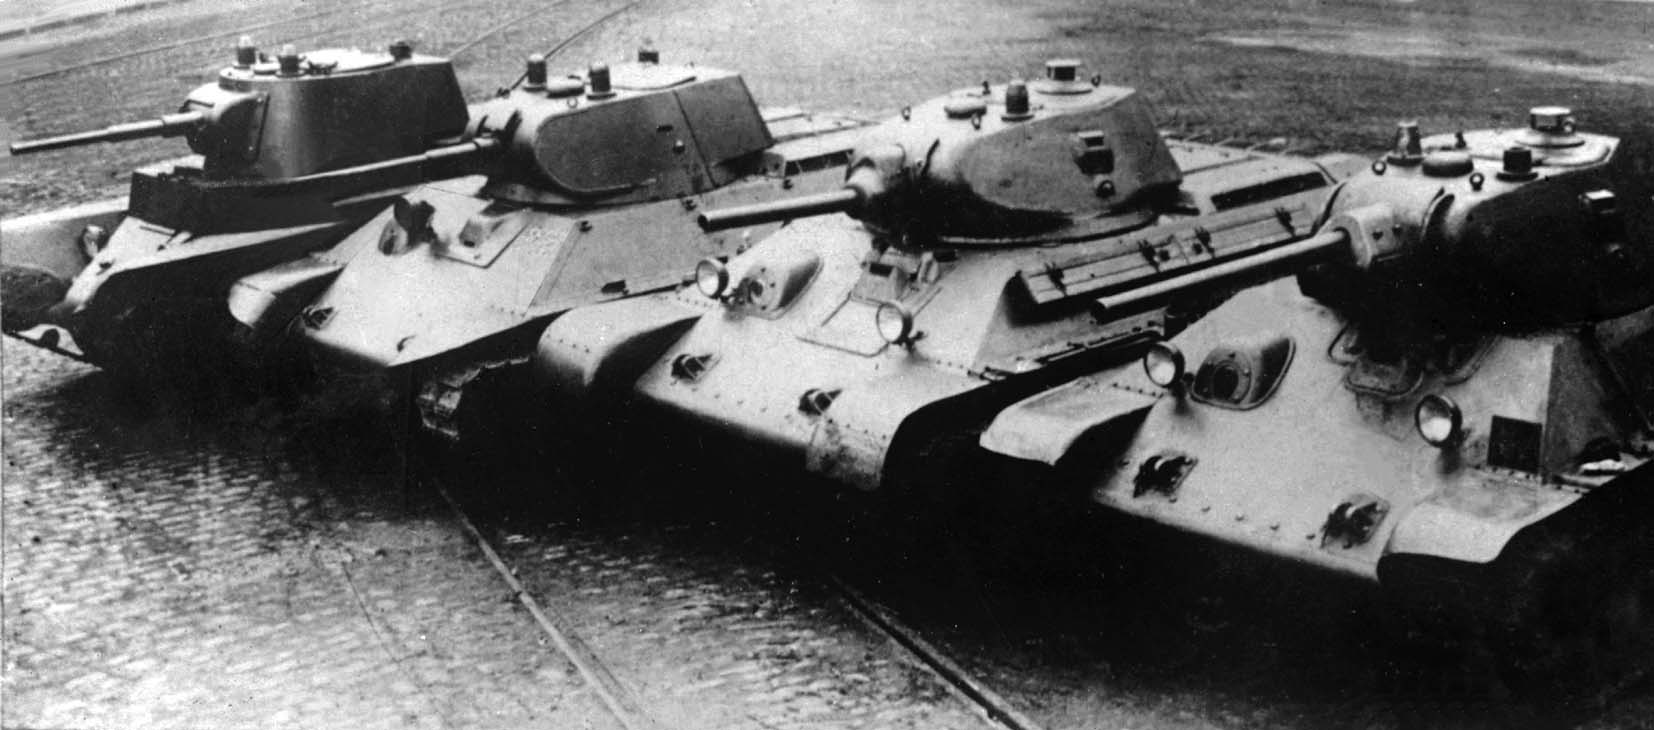 America's first true heavy tank was bristling with firepower